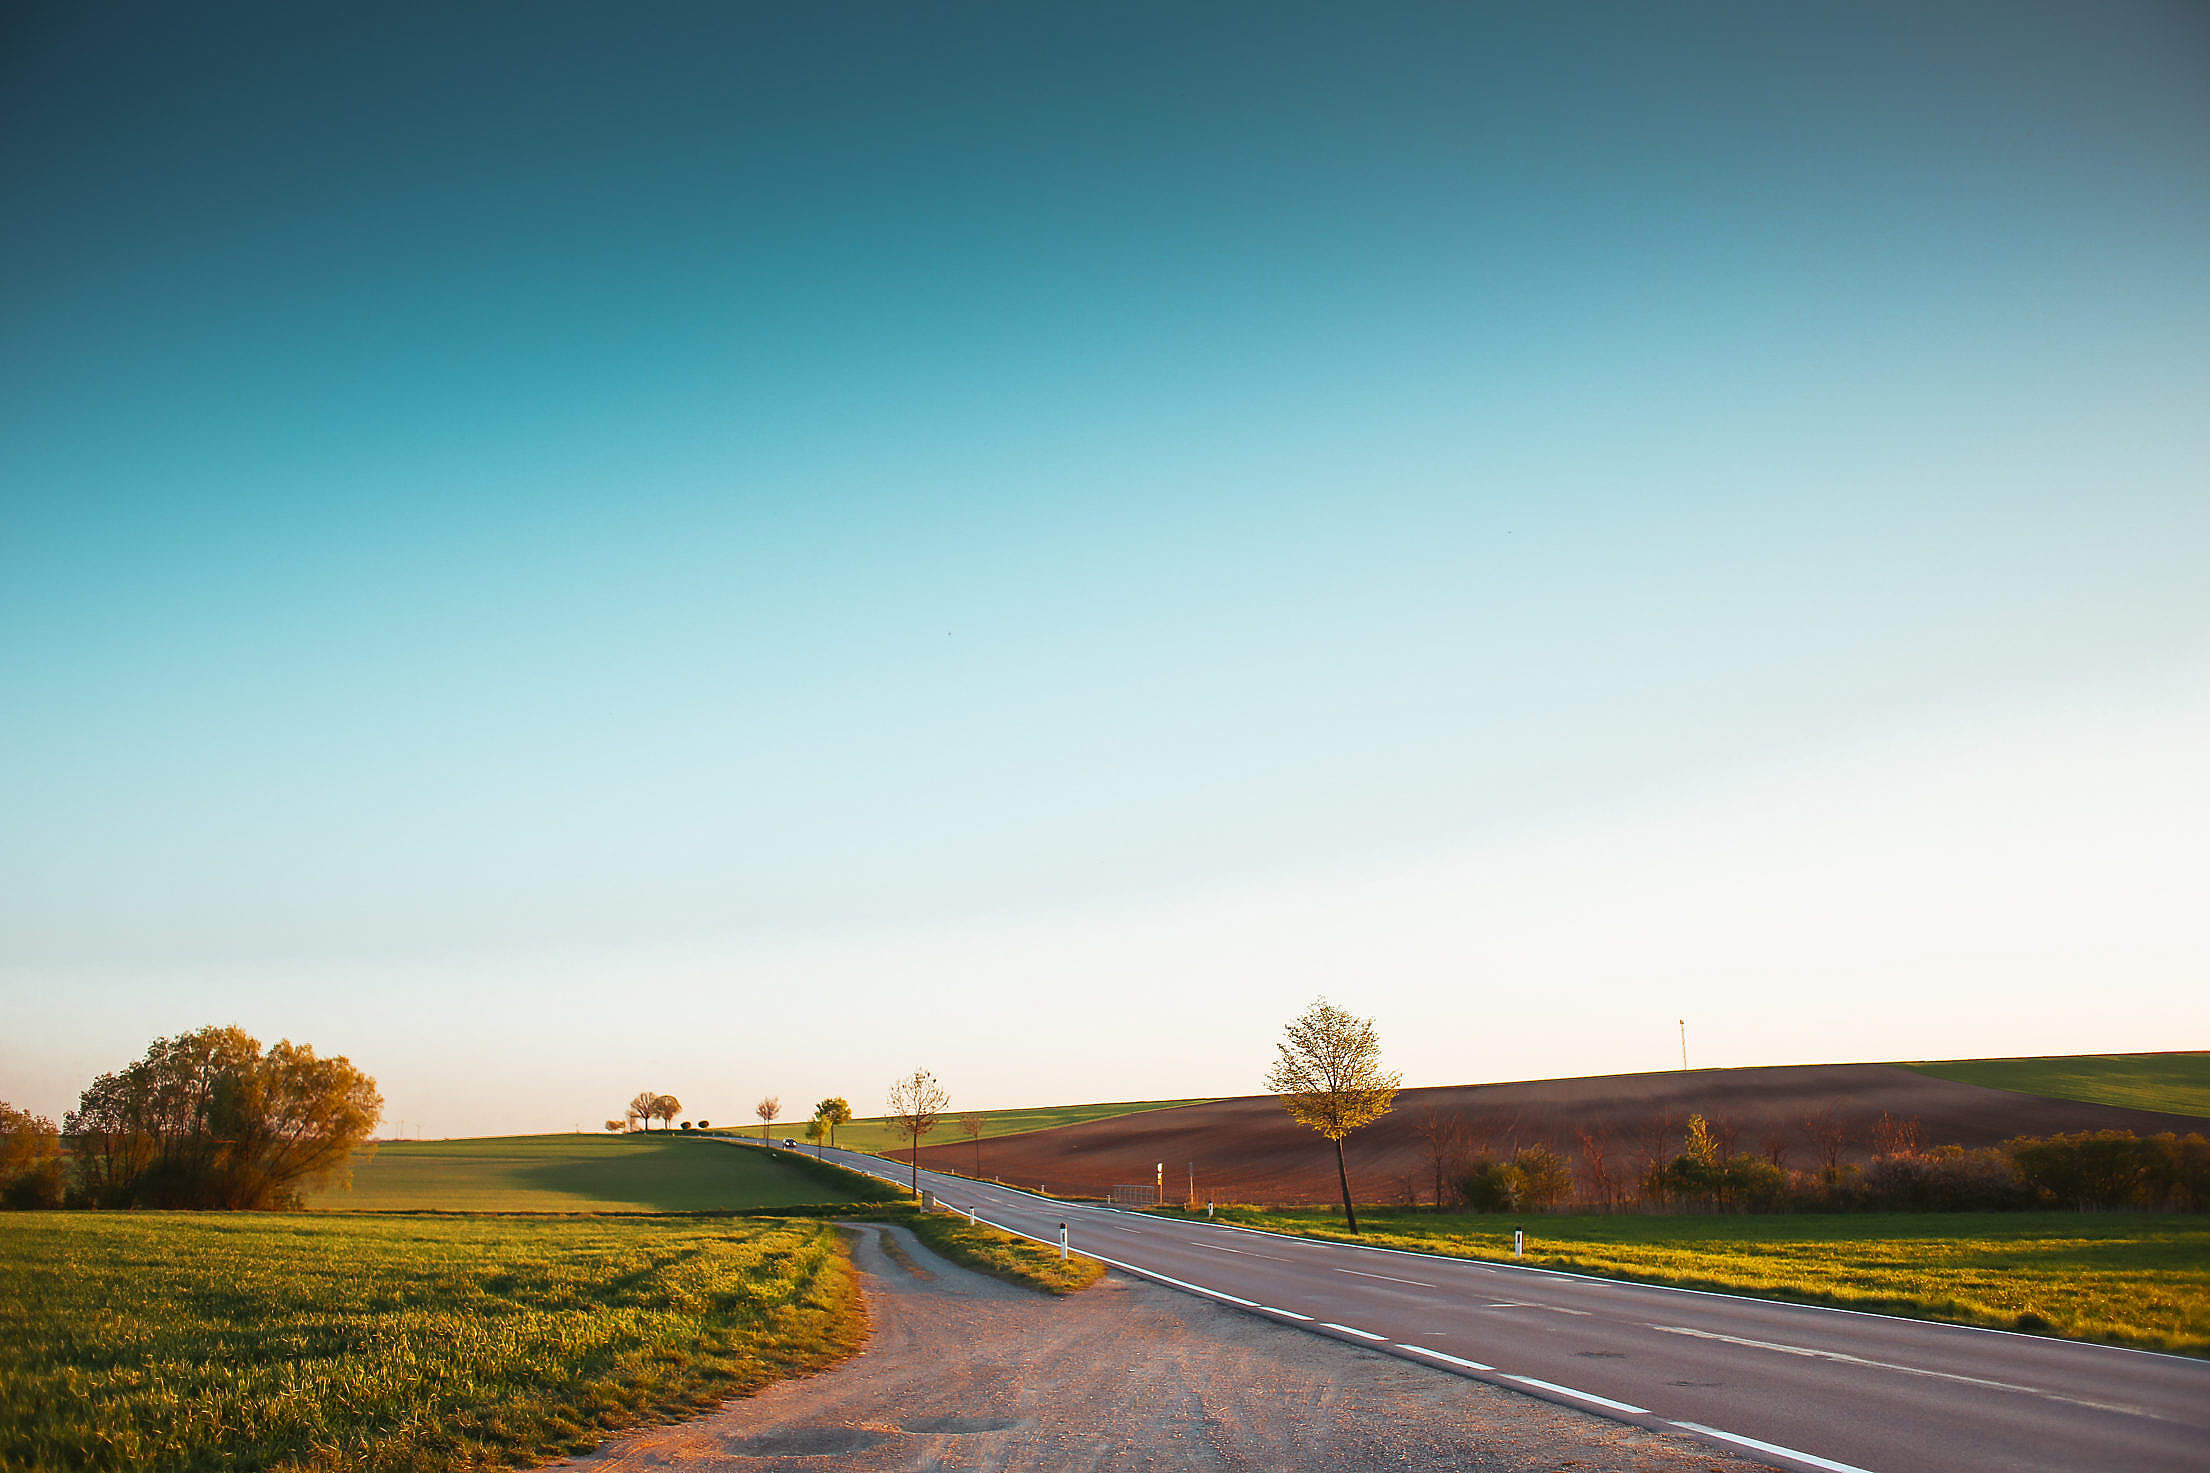 Long Road and Cloudless Sky Free Stock Photo | picjumbo